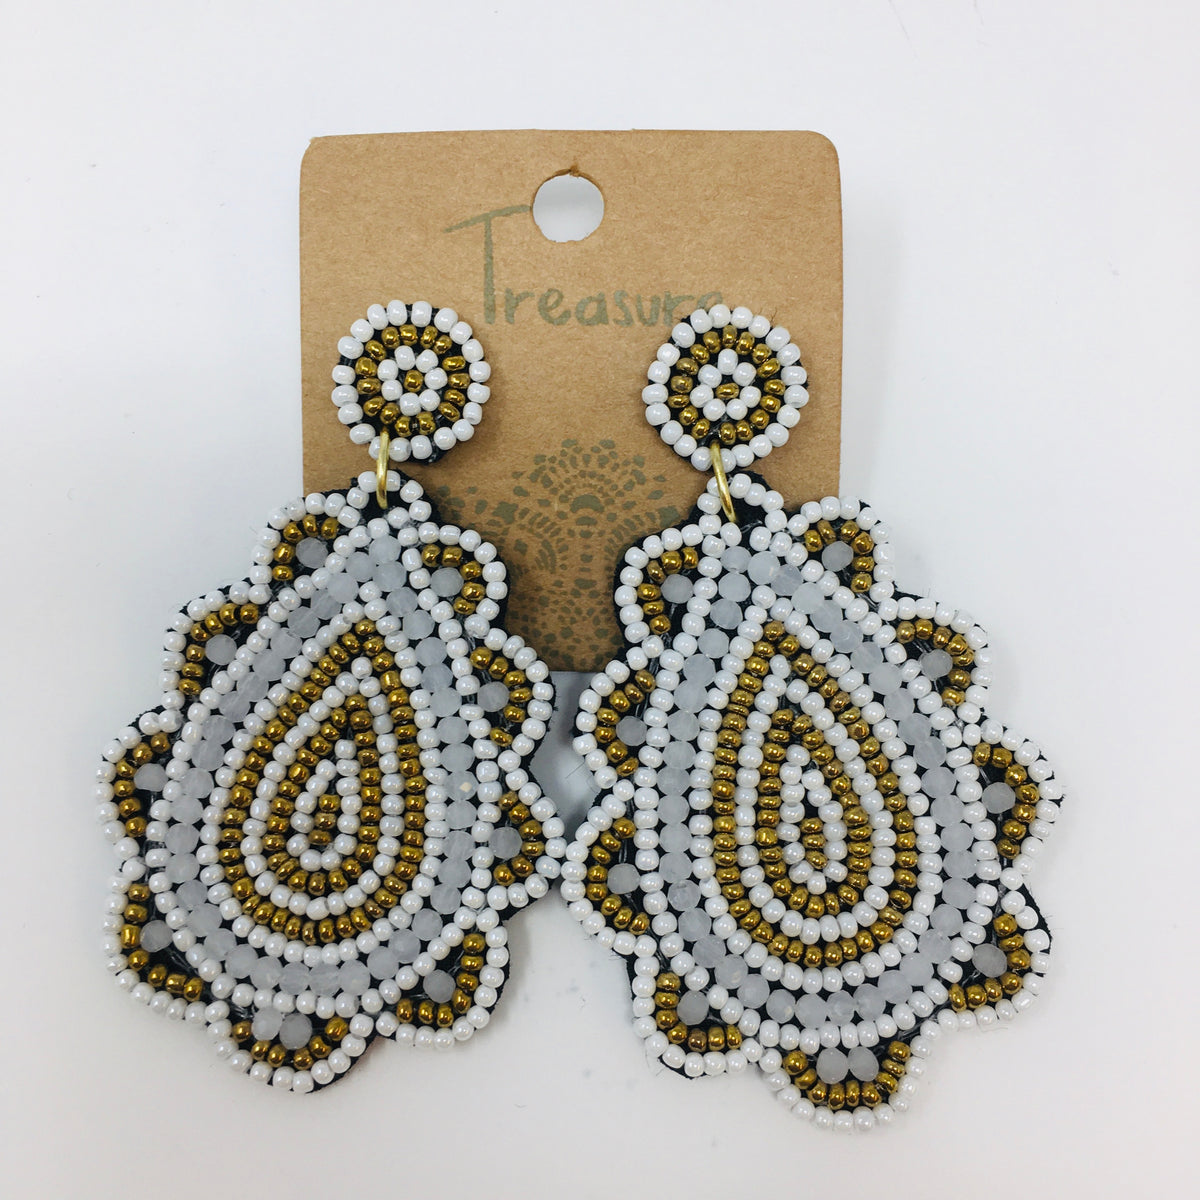 Scalloped teardrop shaped earrings with gold &amp; white colored seed beads shown on white background